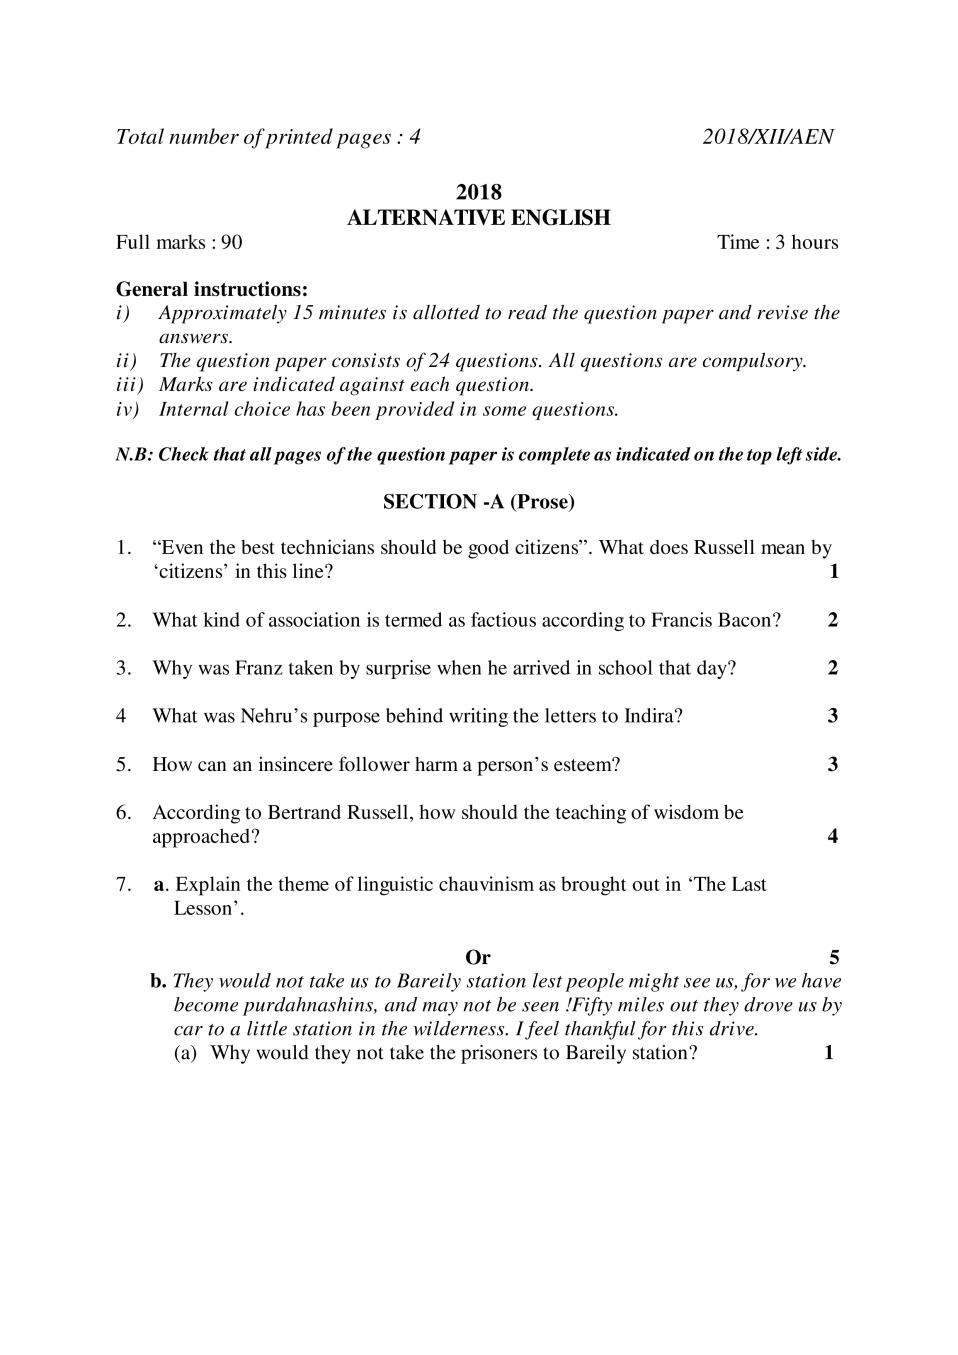 NBSE Class 12 Question Paper 2018 for Alternative English - Page 1